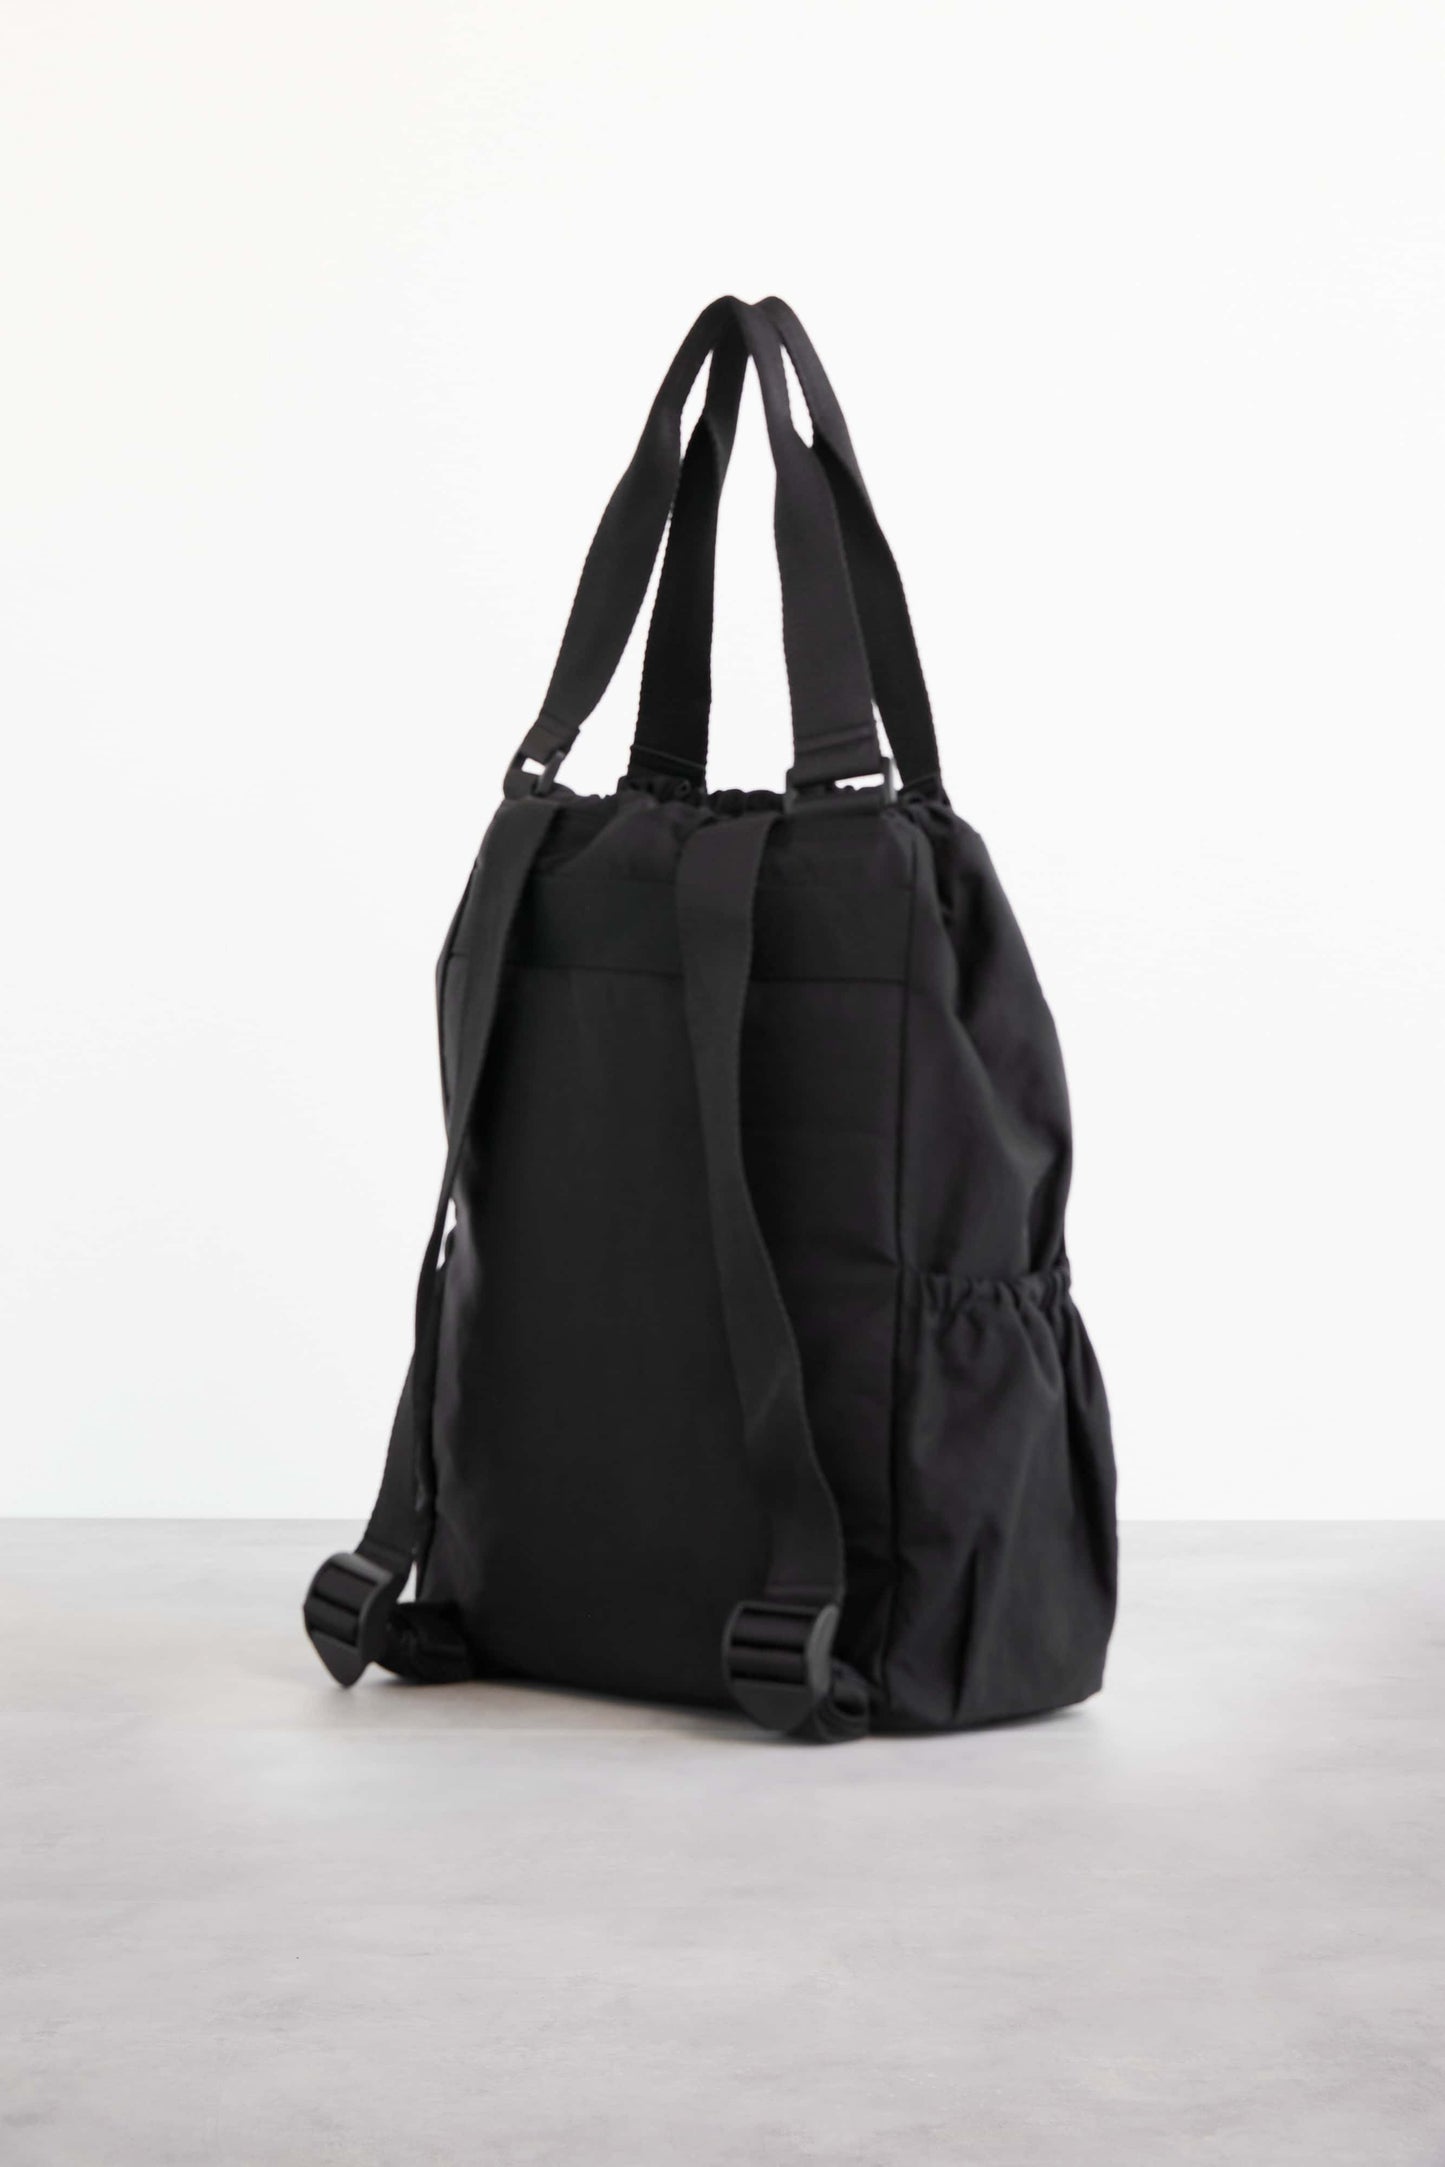 Sport Tote Black Back and Side